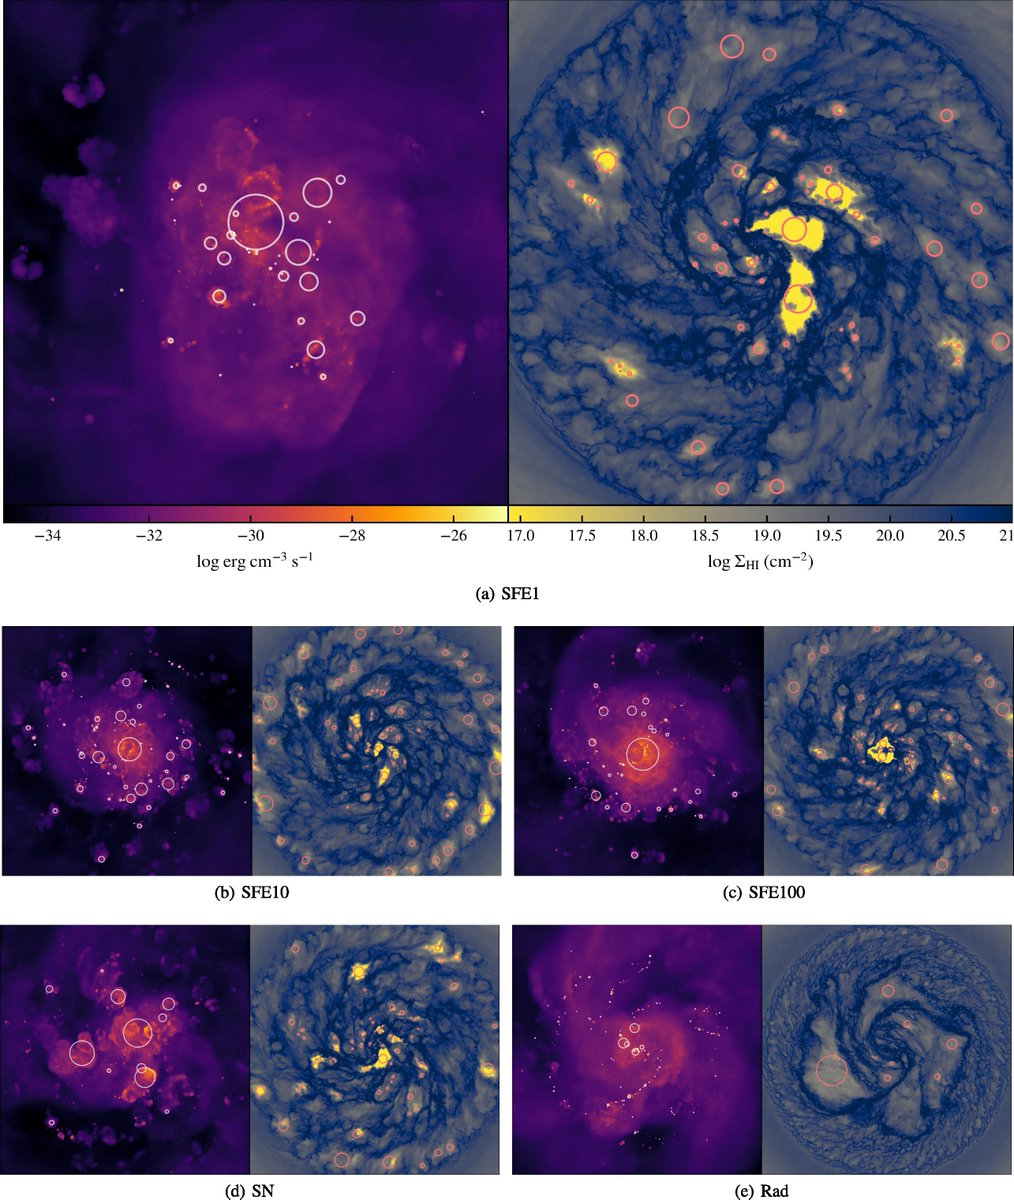 Published in #MNRAS 'Evolution and distribution of superbubbles in simulated Milky Way-like galaxies', Li et al. This is Fig. 1: for the caption & to read the paper visit academic.oup.com/mnras/article/…